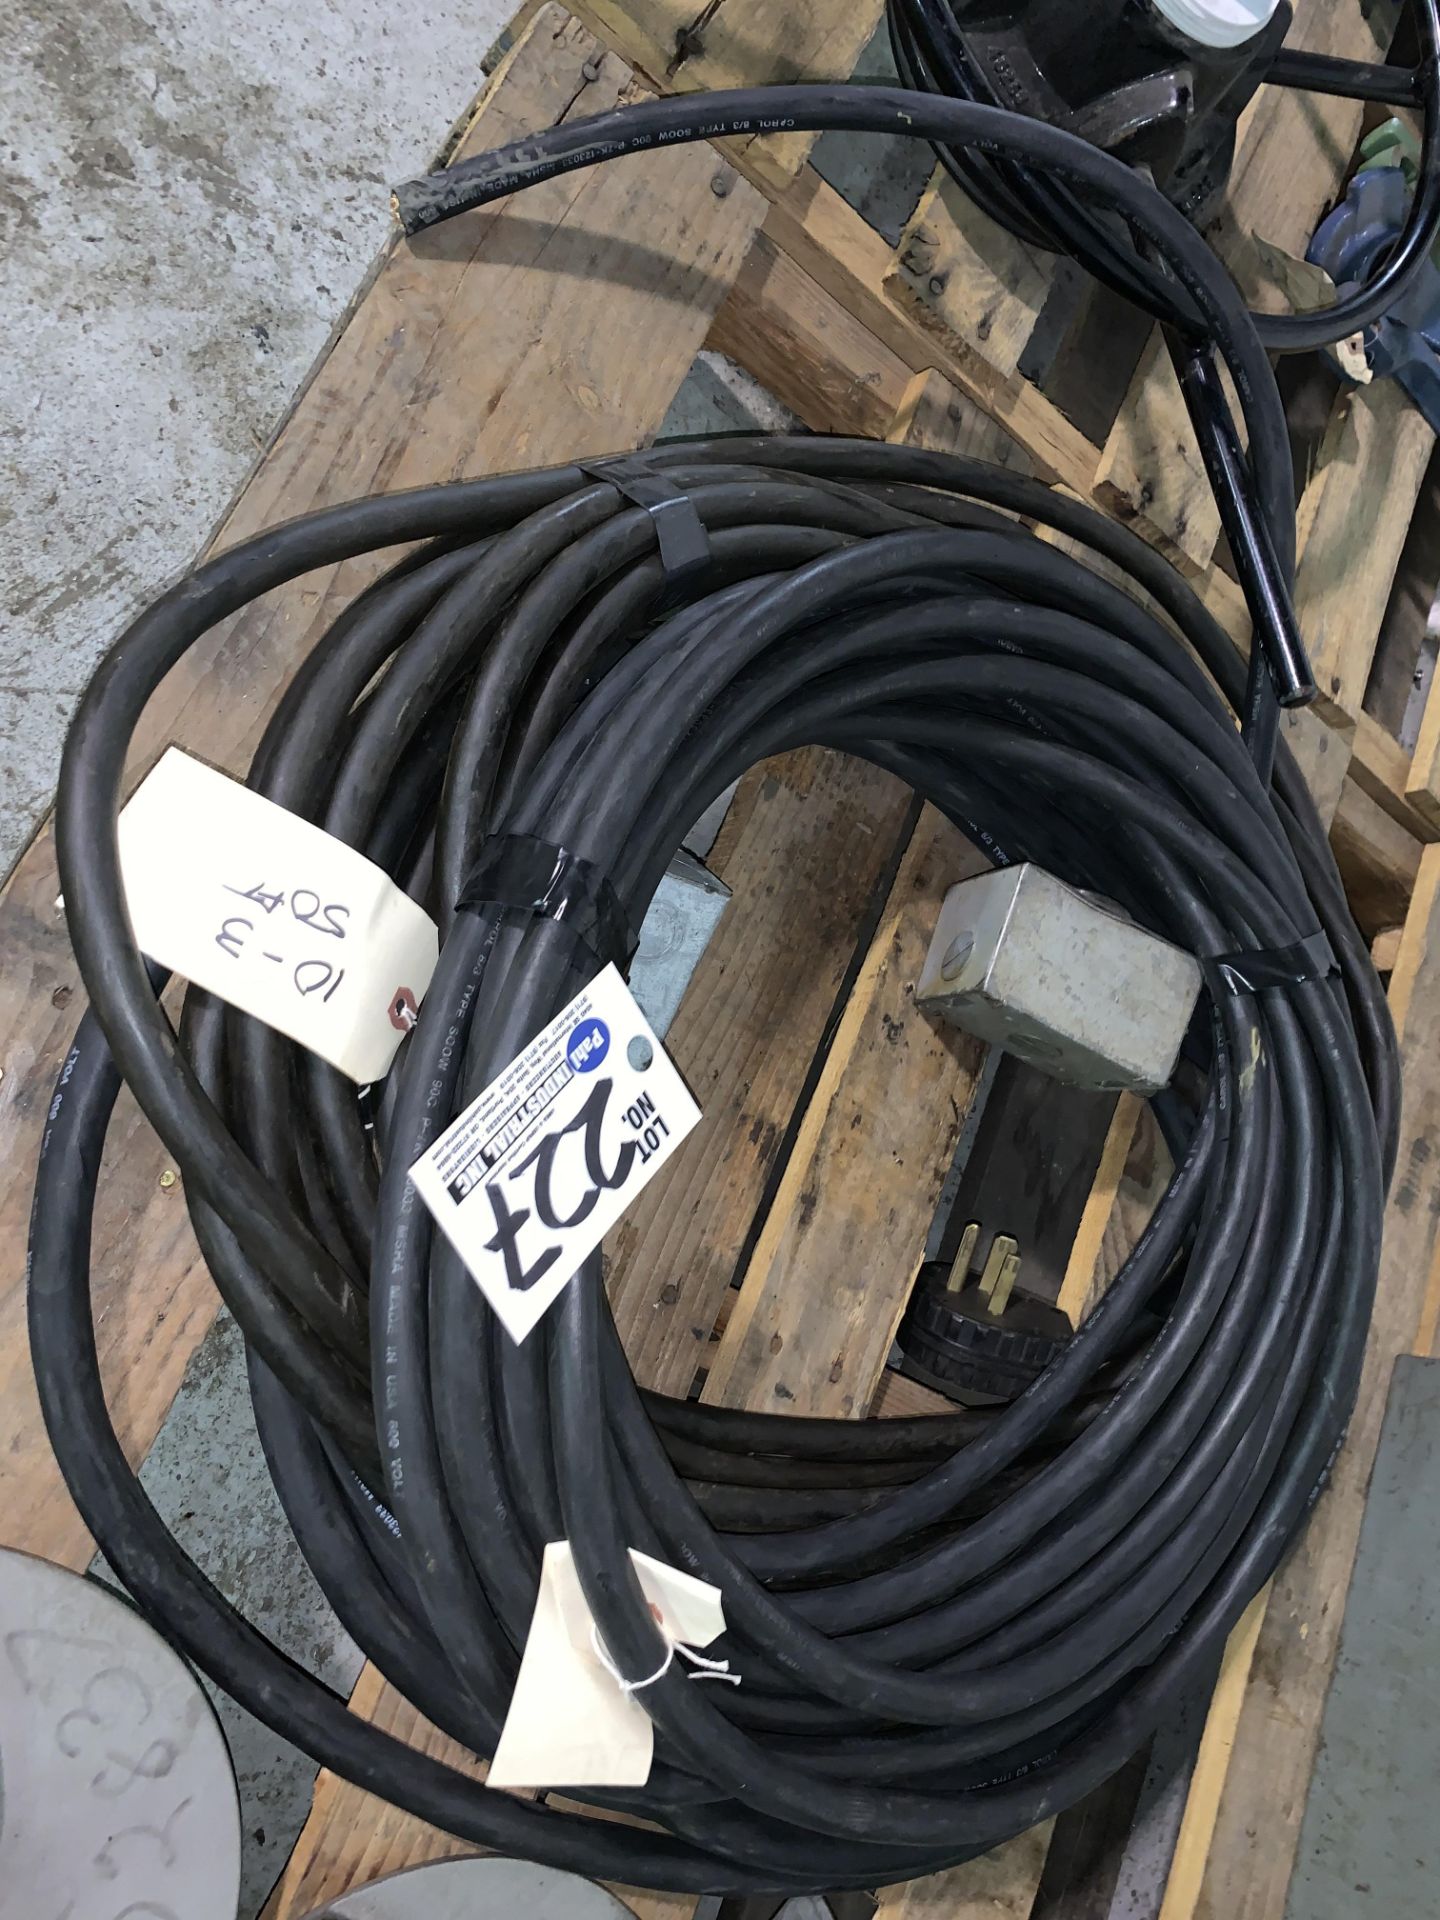 (3) 3-Phase Cords with 2 plugs and boxes